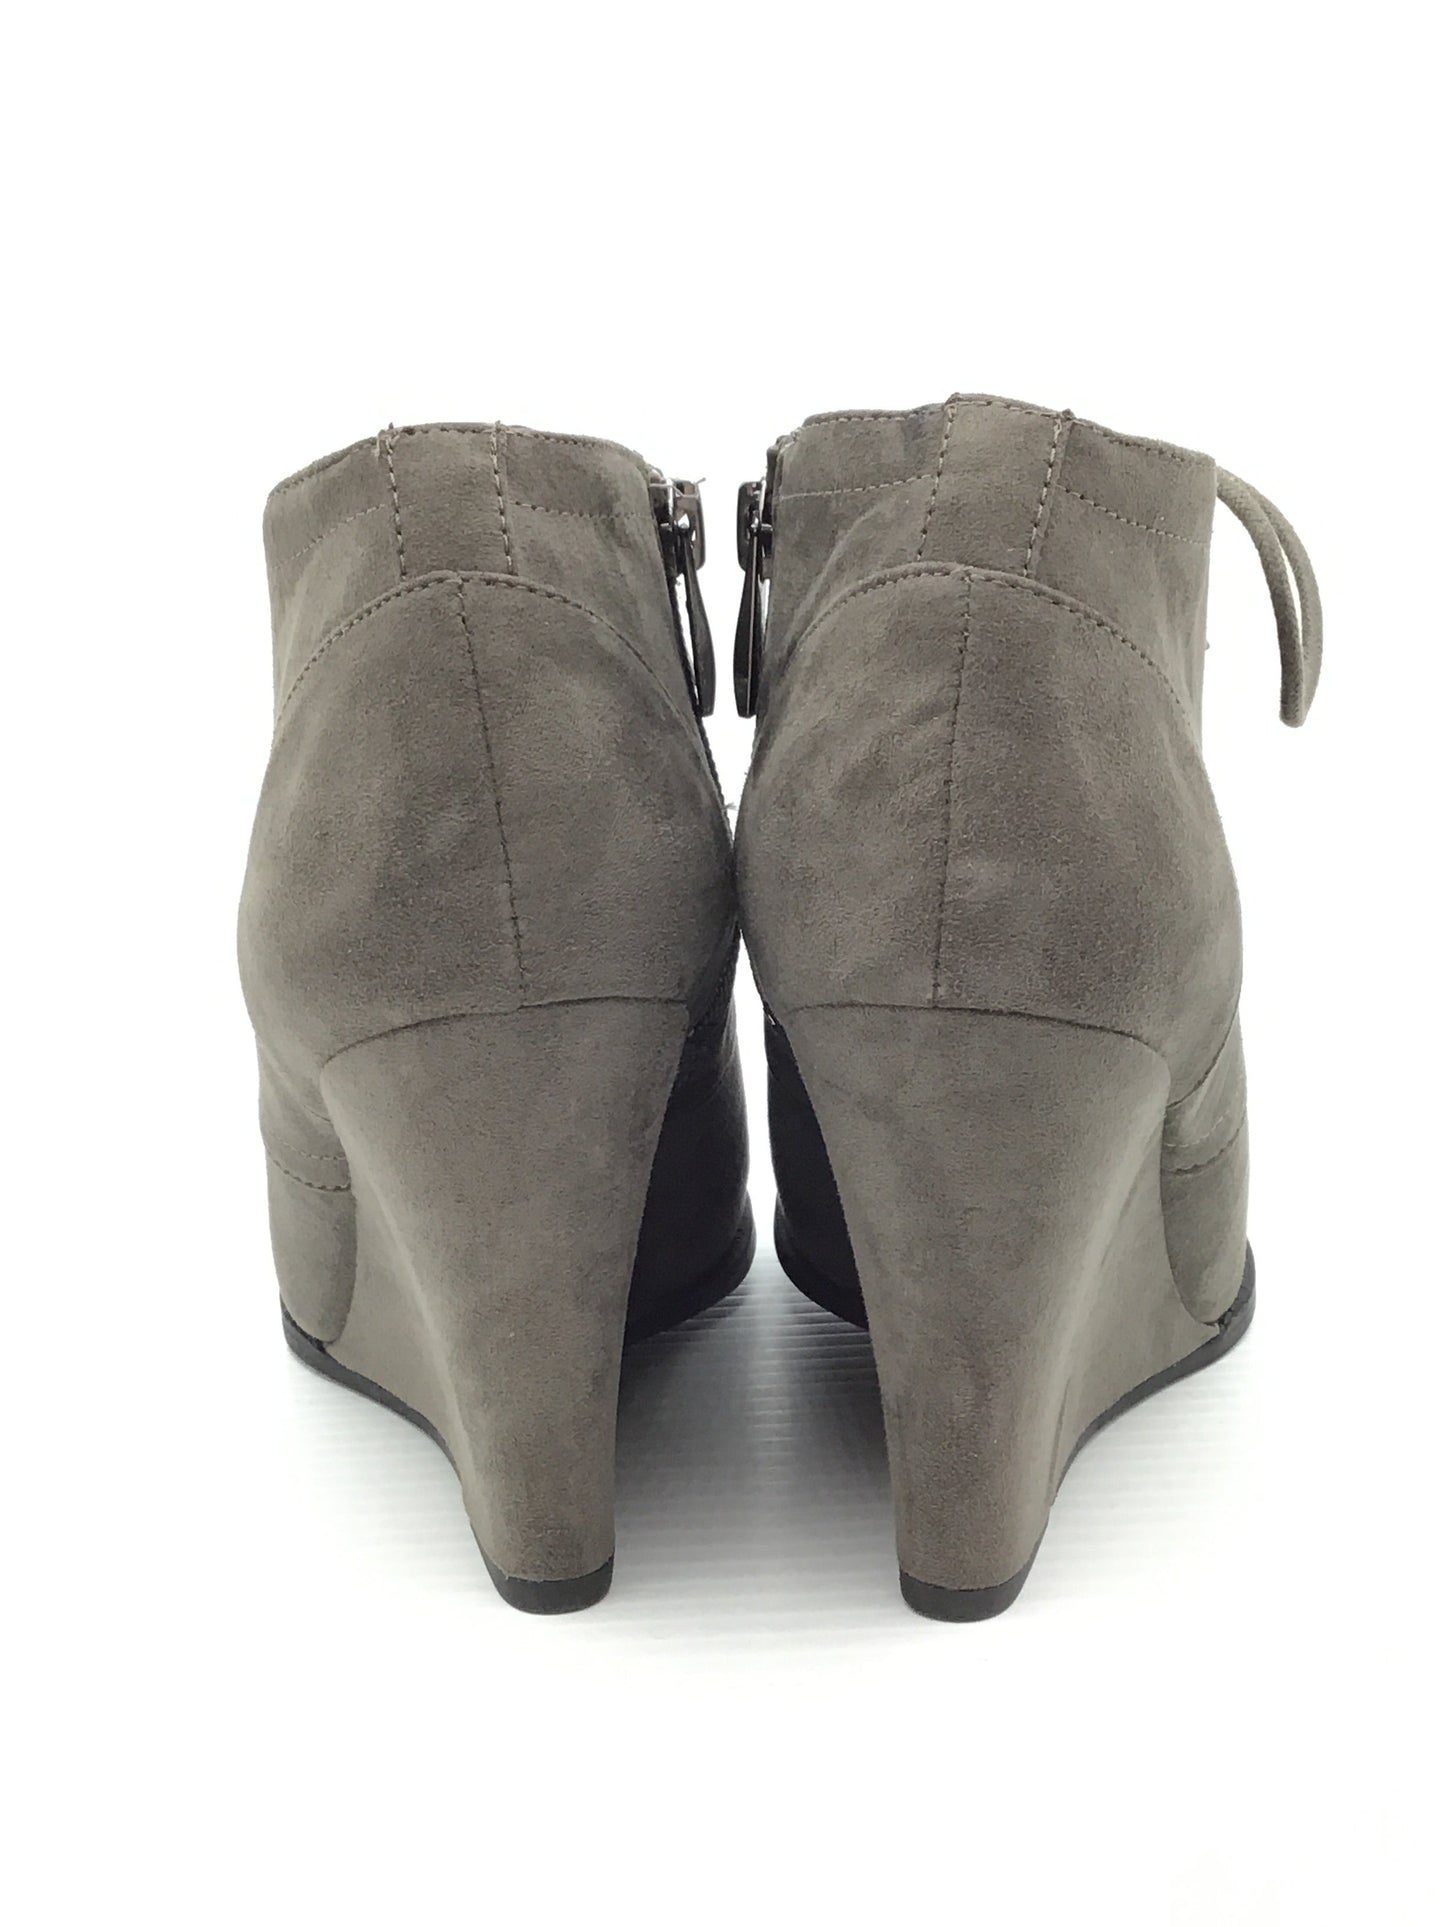 Boots Ankle Heels By Franco Sarto  Size: 6.5